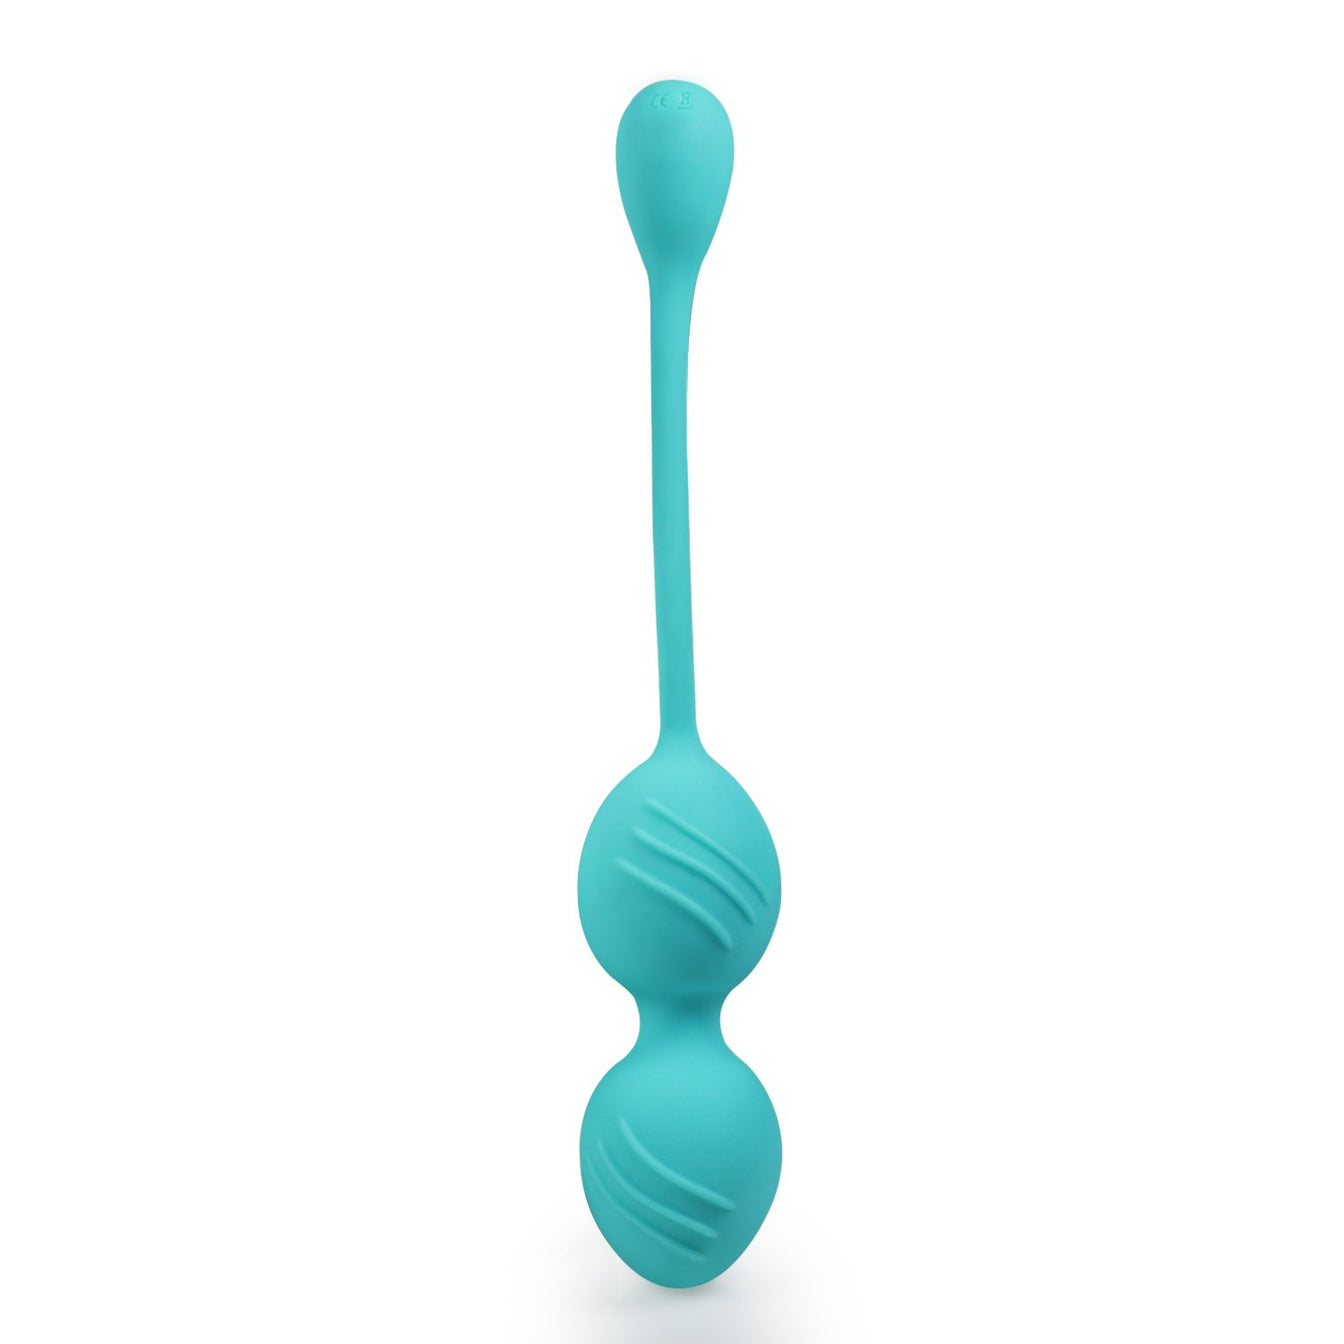 Teal colored kegel balls to strength vaginal muscles